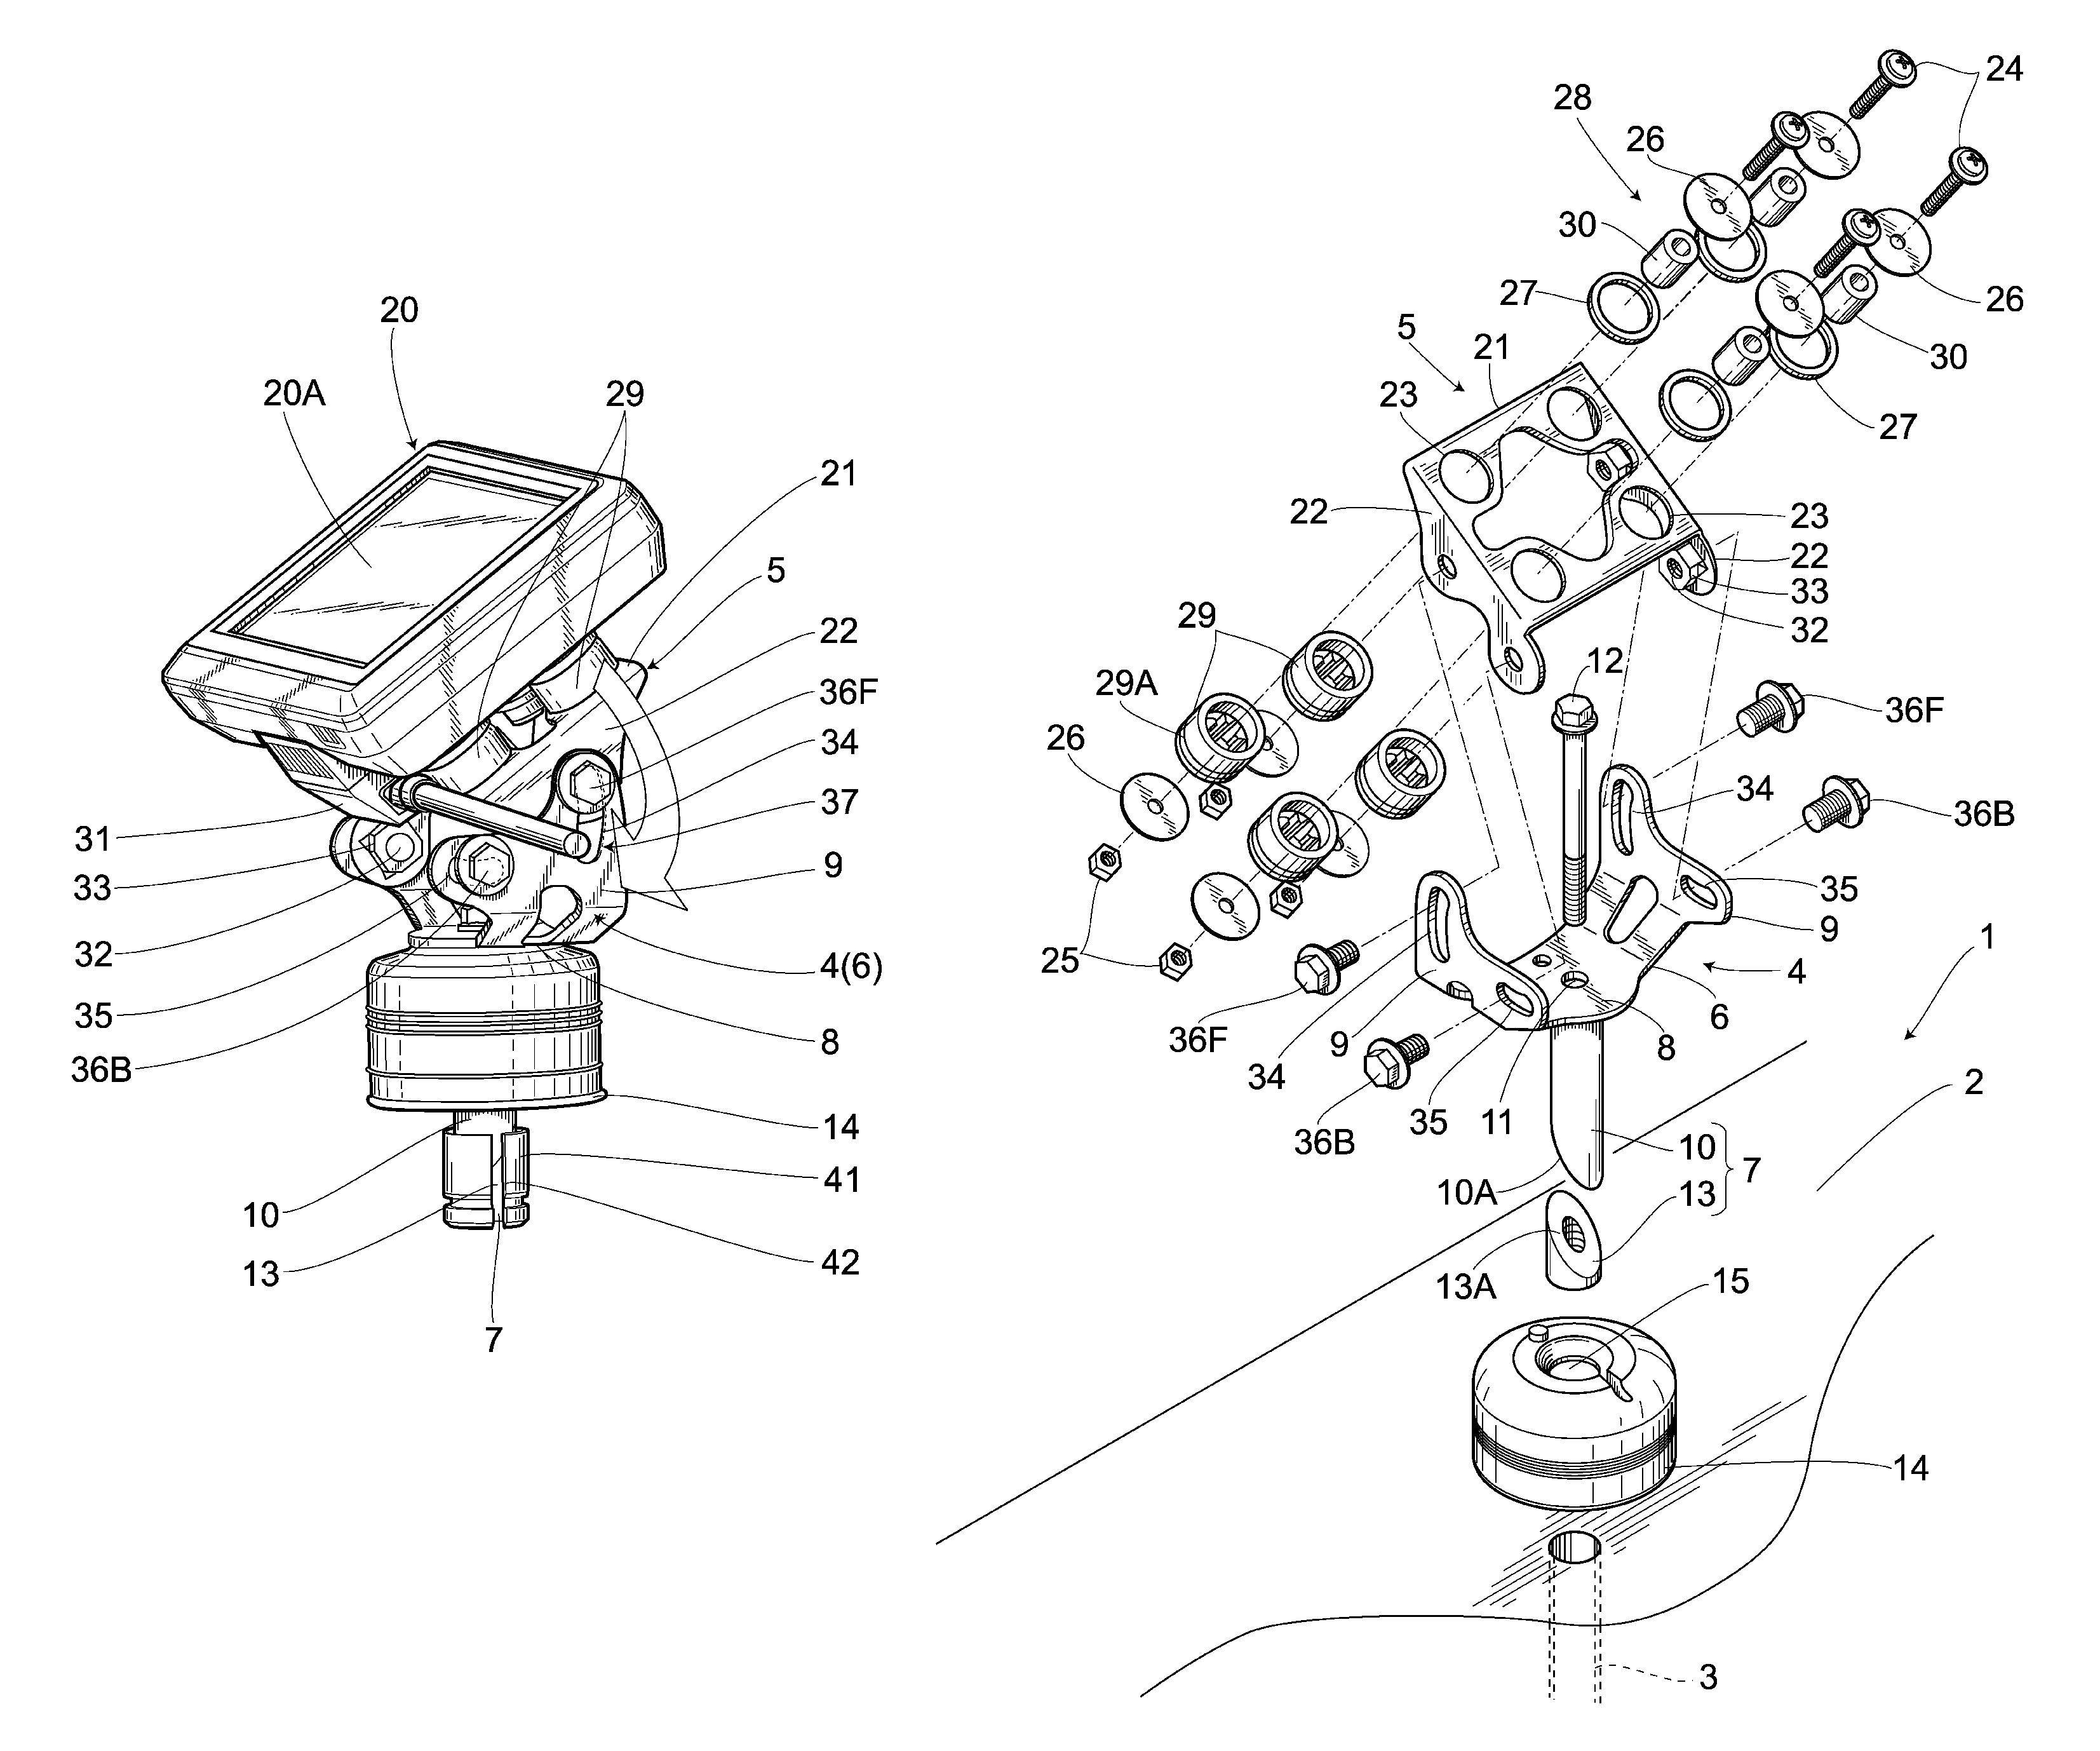 Electrical accessory mounting device for a saddle-type vehicle